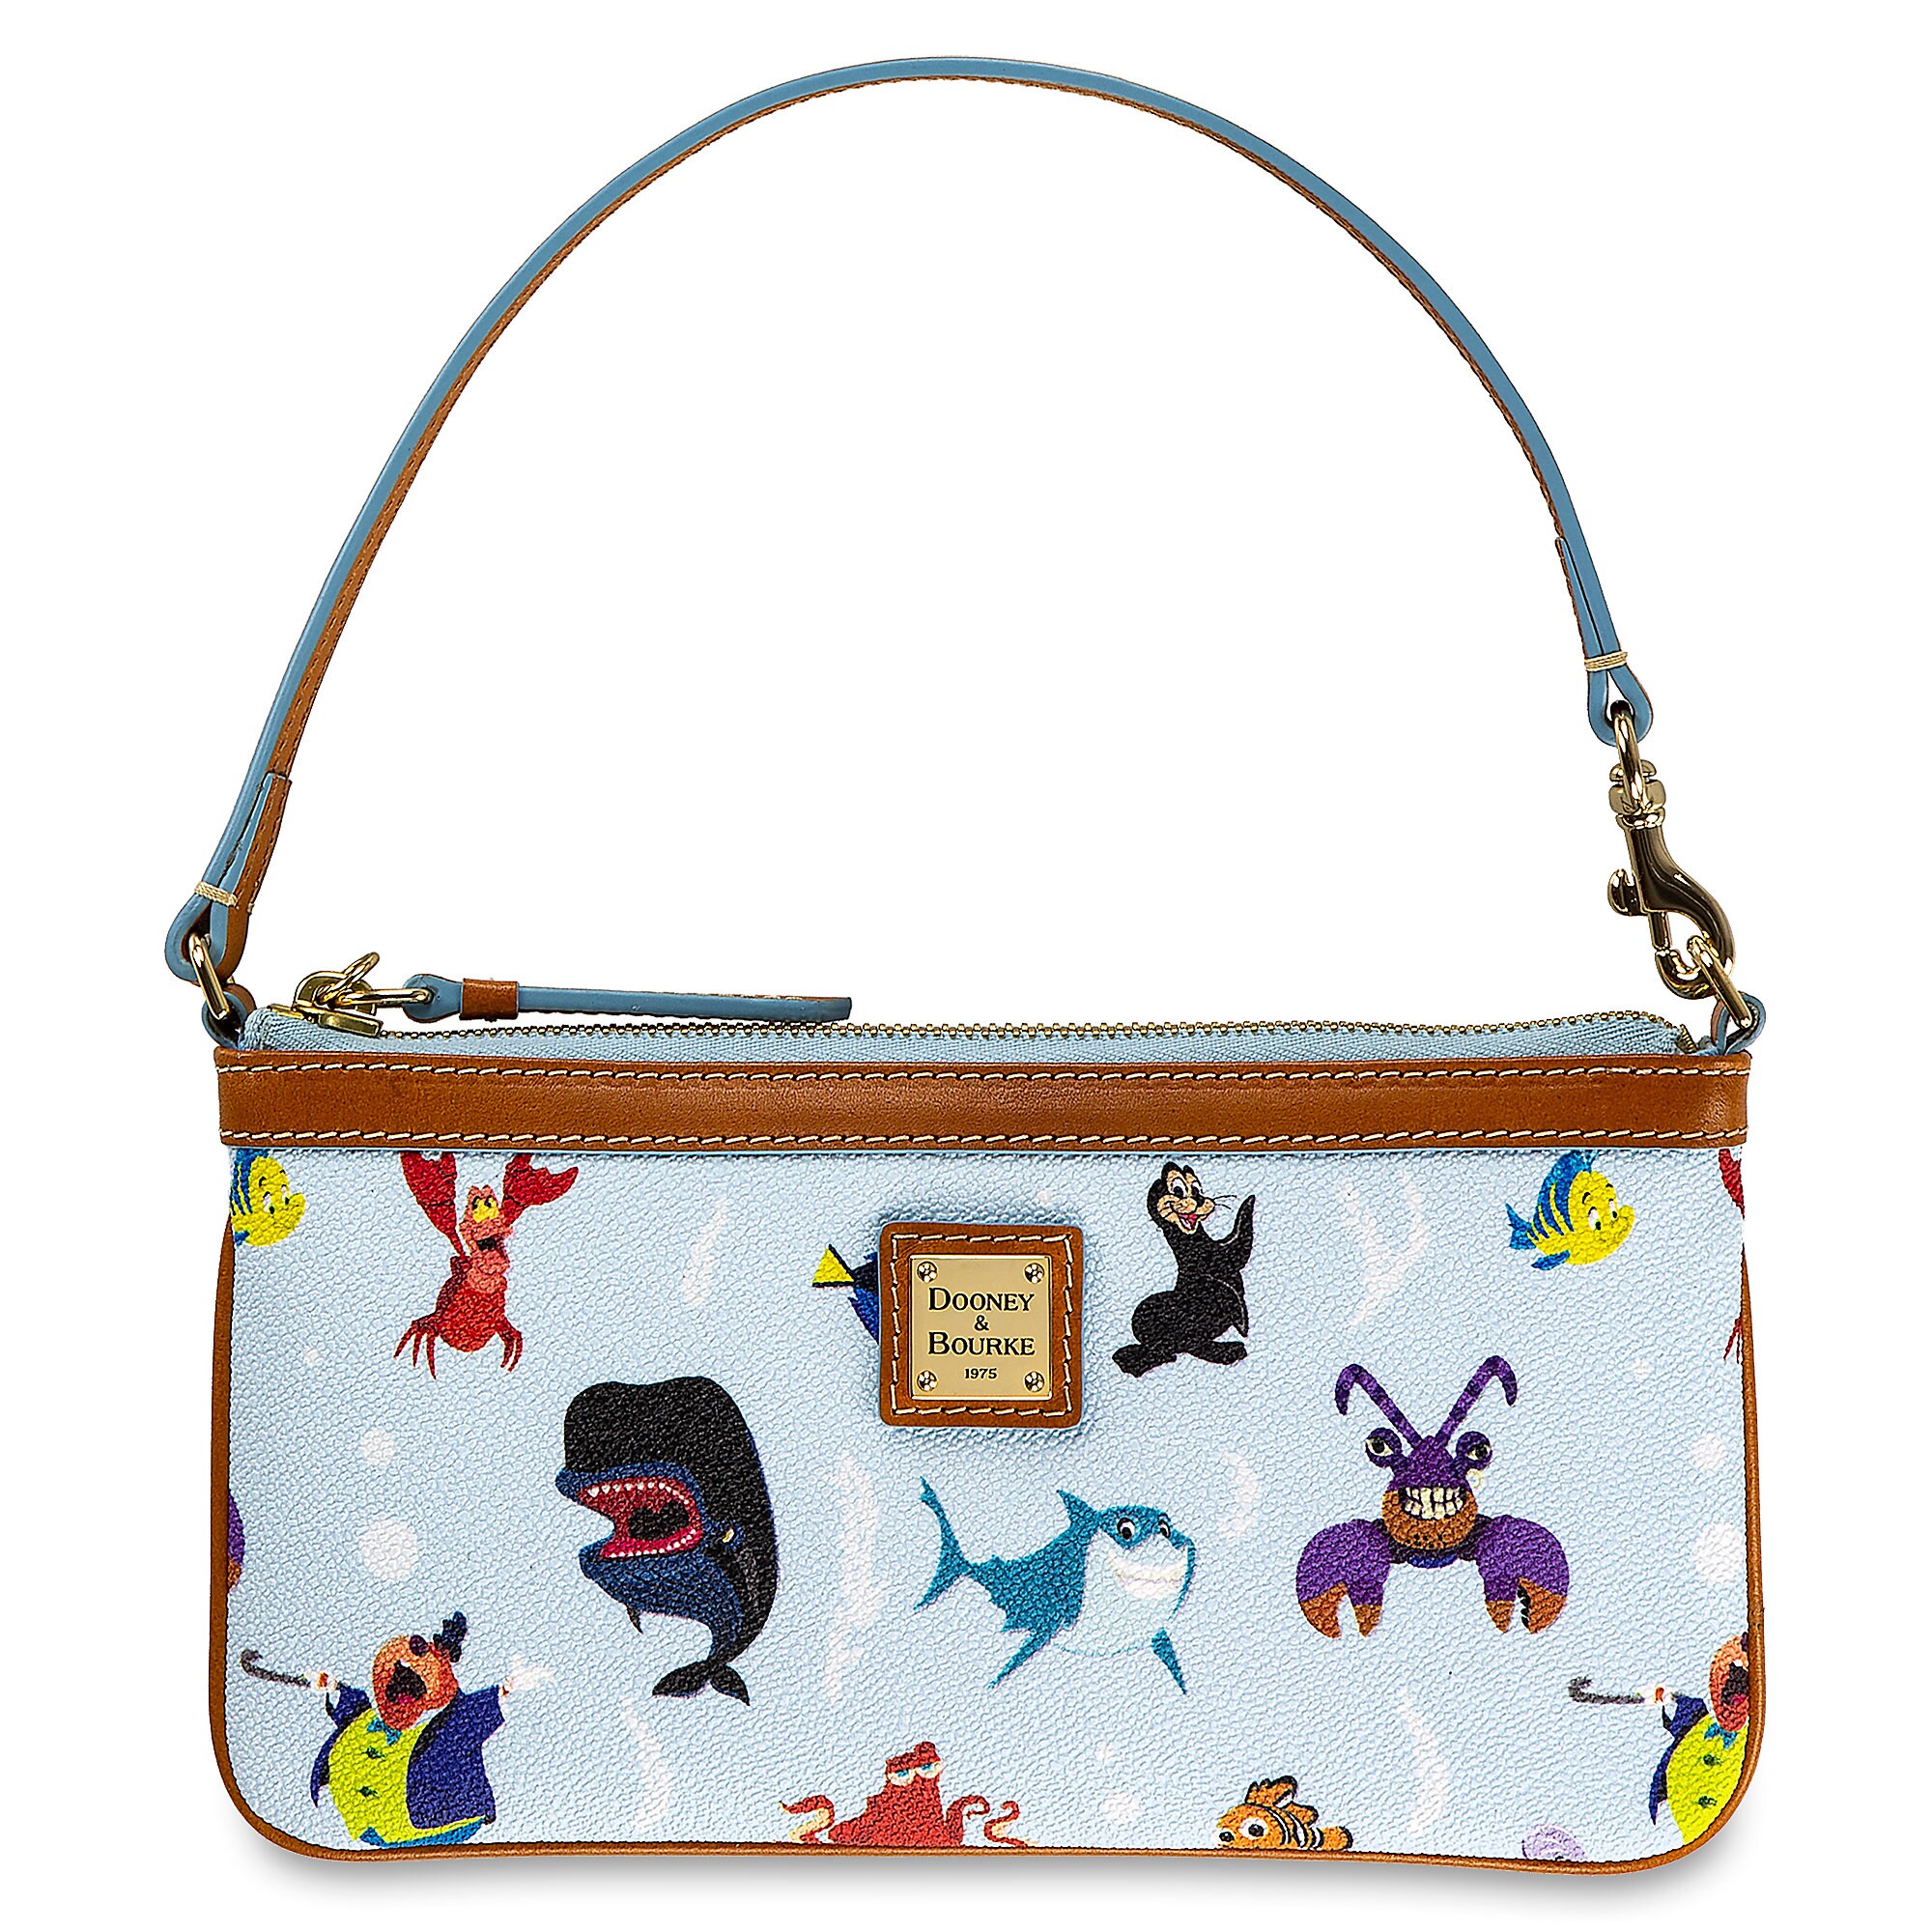 Out to Sea Wristlet by Dooney & Bourke